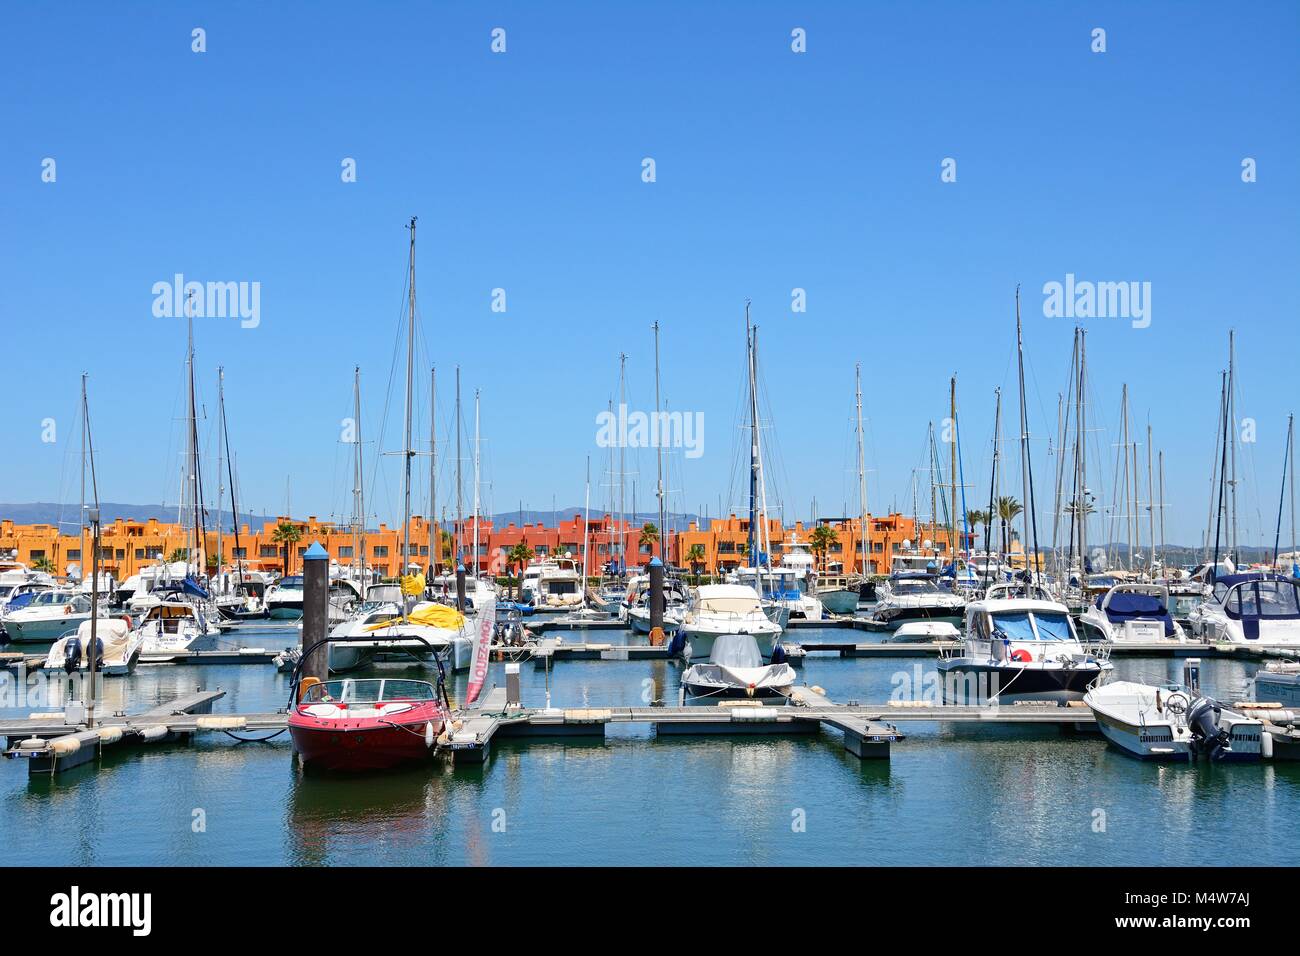 Luxury yachts and motorboats moored in the marina with apartments to the rear, Portimao, Algarve, Portugal, Europe. Stock Photo